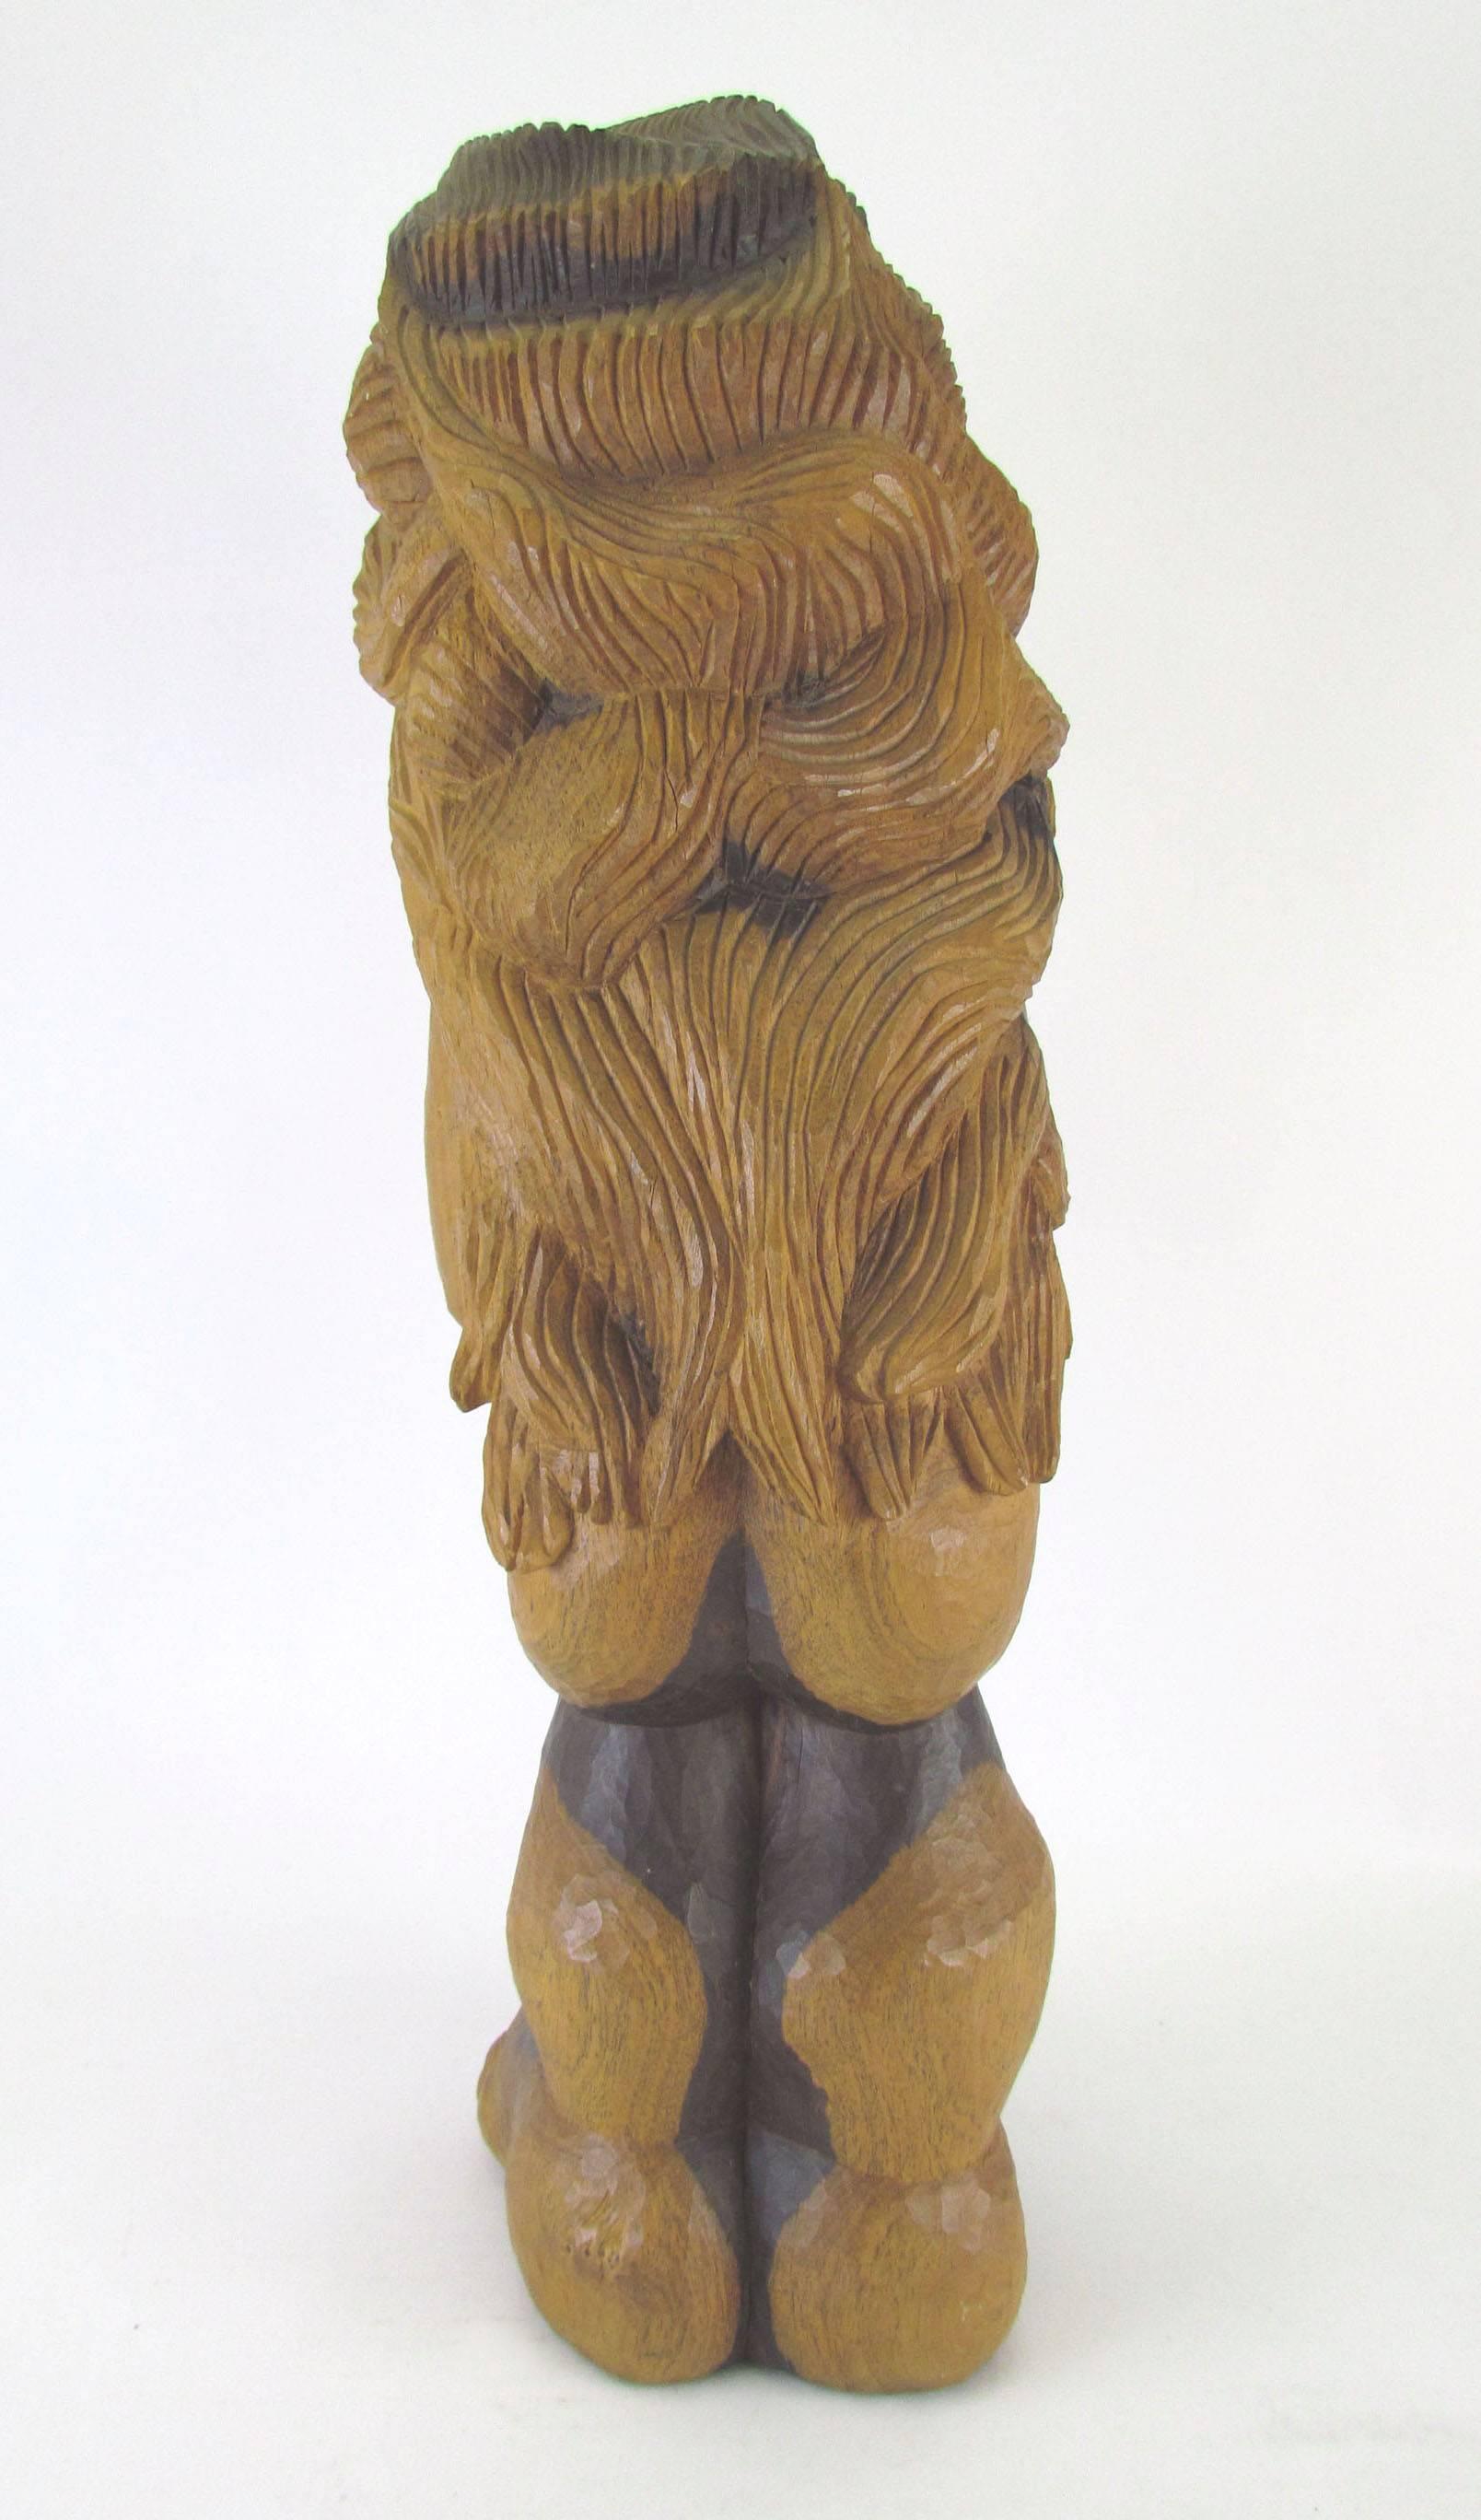 Carved Wood Mid-Century Sculpture Titled “Miss Num” by Diane Derrick In Excellent Condition For Sale In Peabody, MA